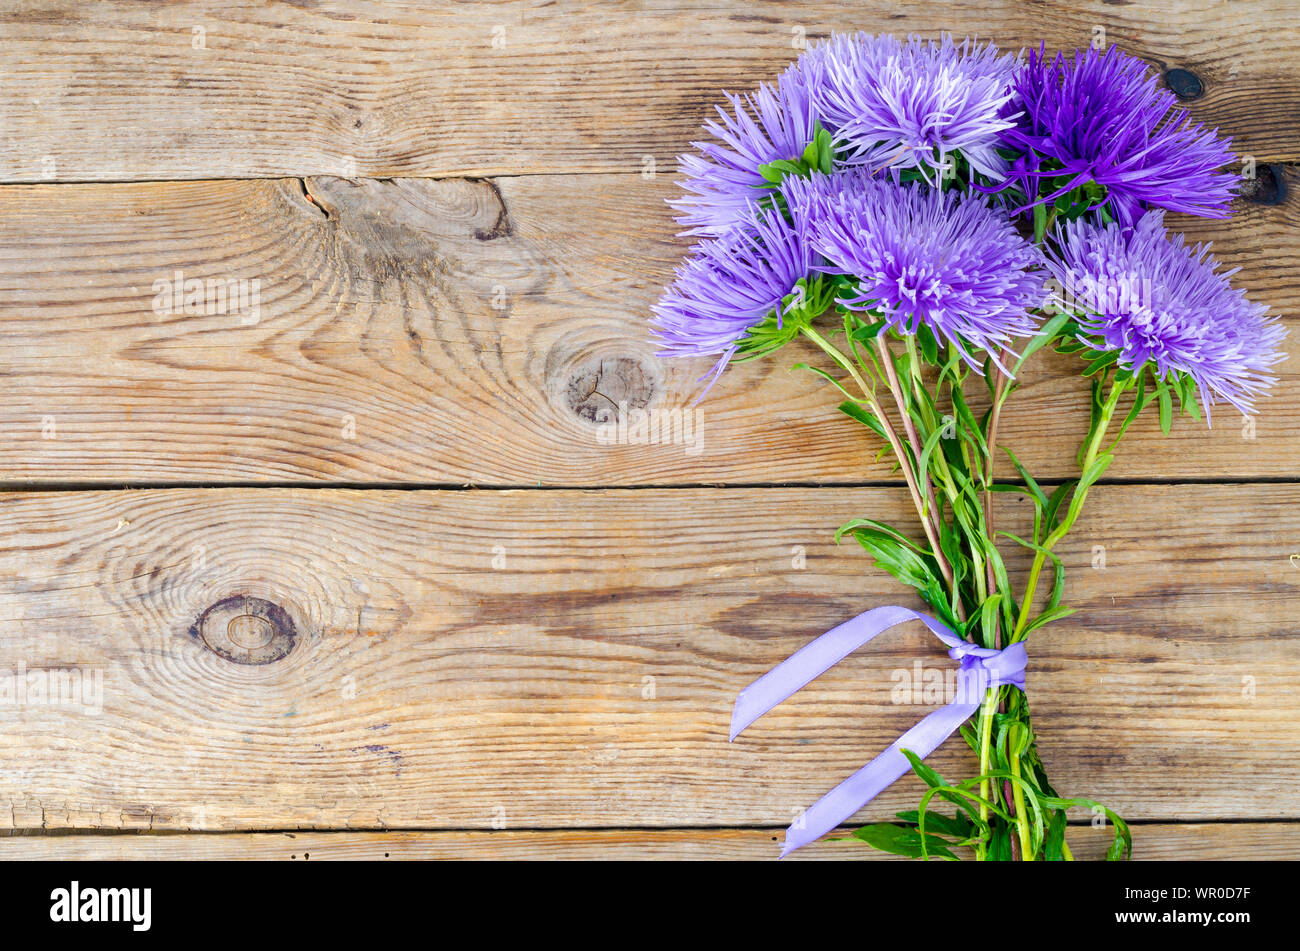 Autumn aster flowers multicolored on wooden background Stock Photo